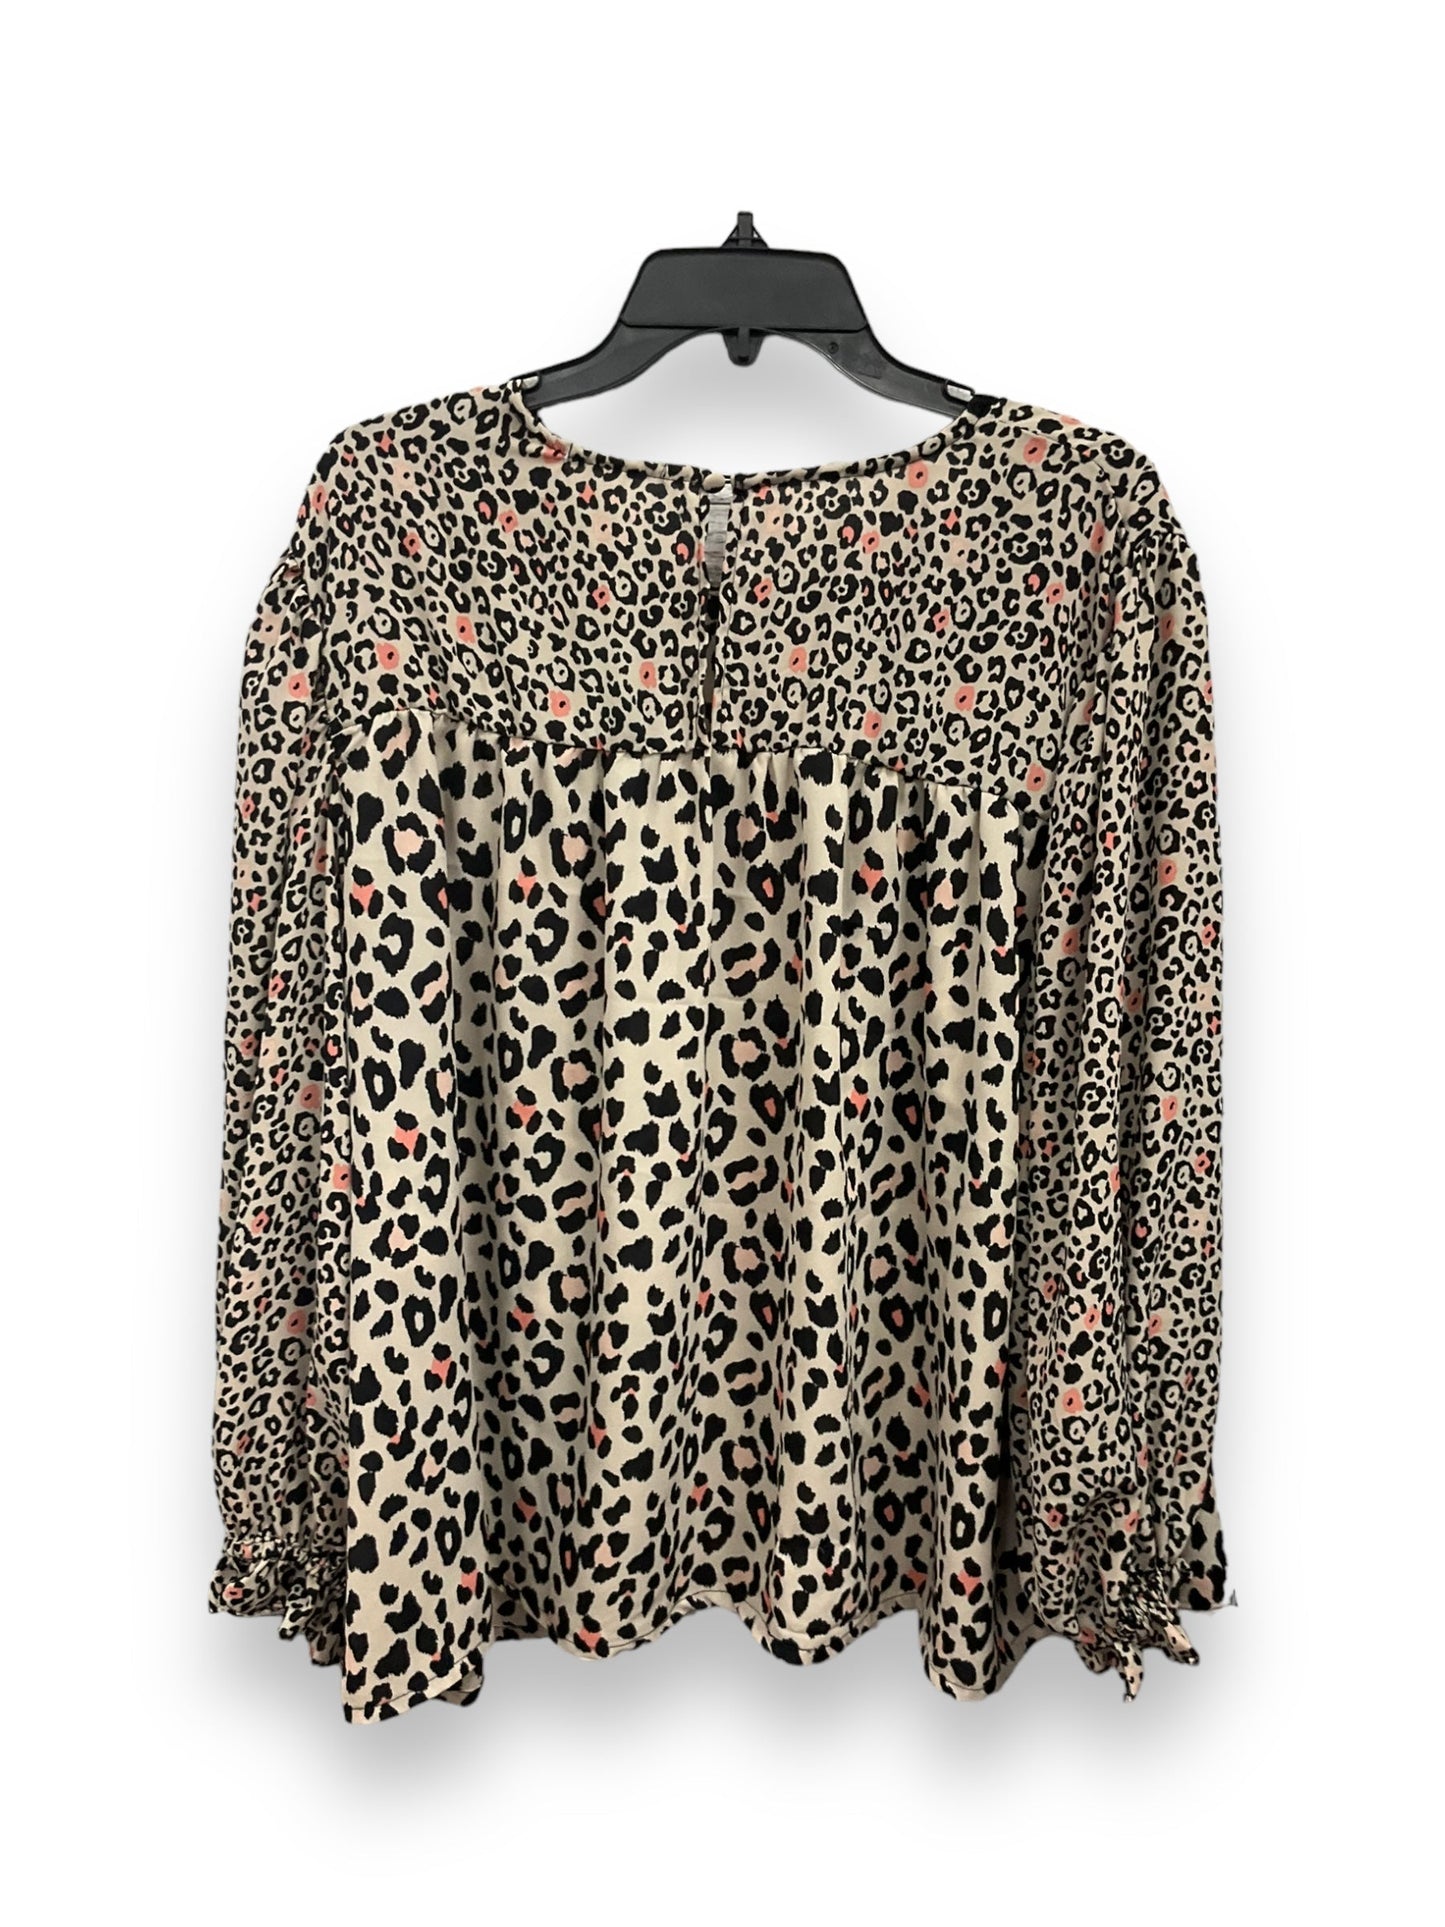 Animal Print Blouse Long Sleeve Maurices, Size 2x